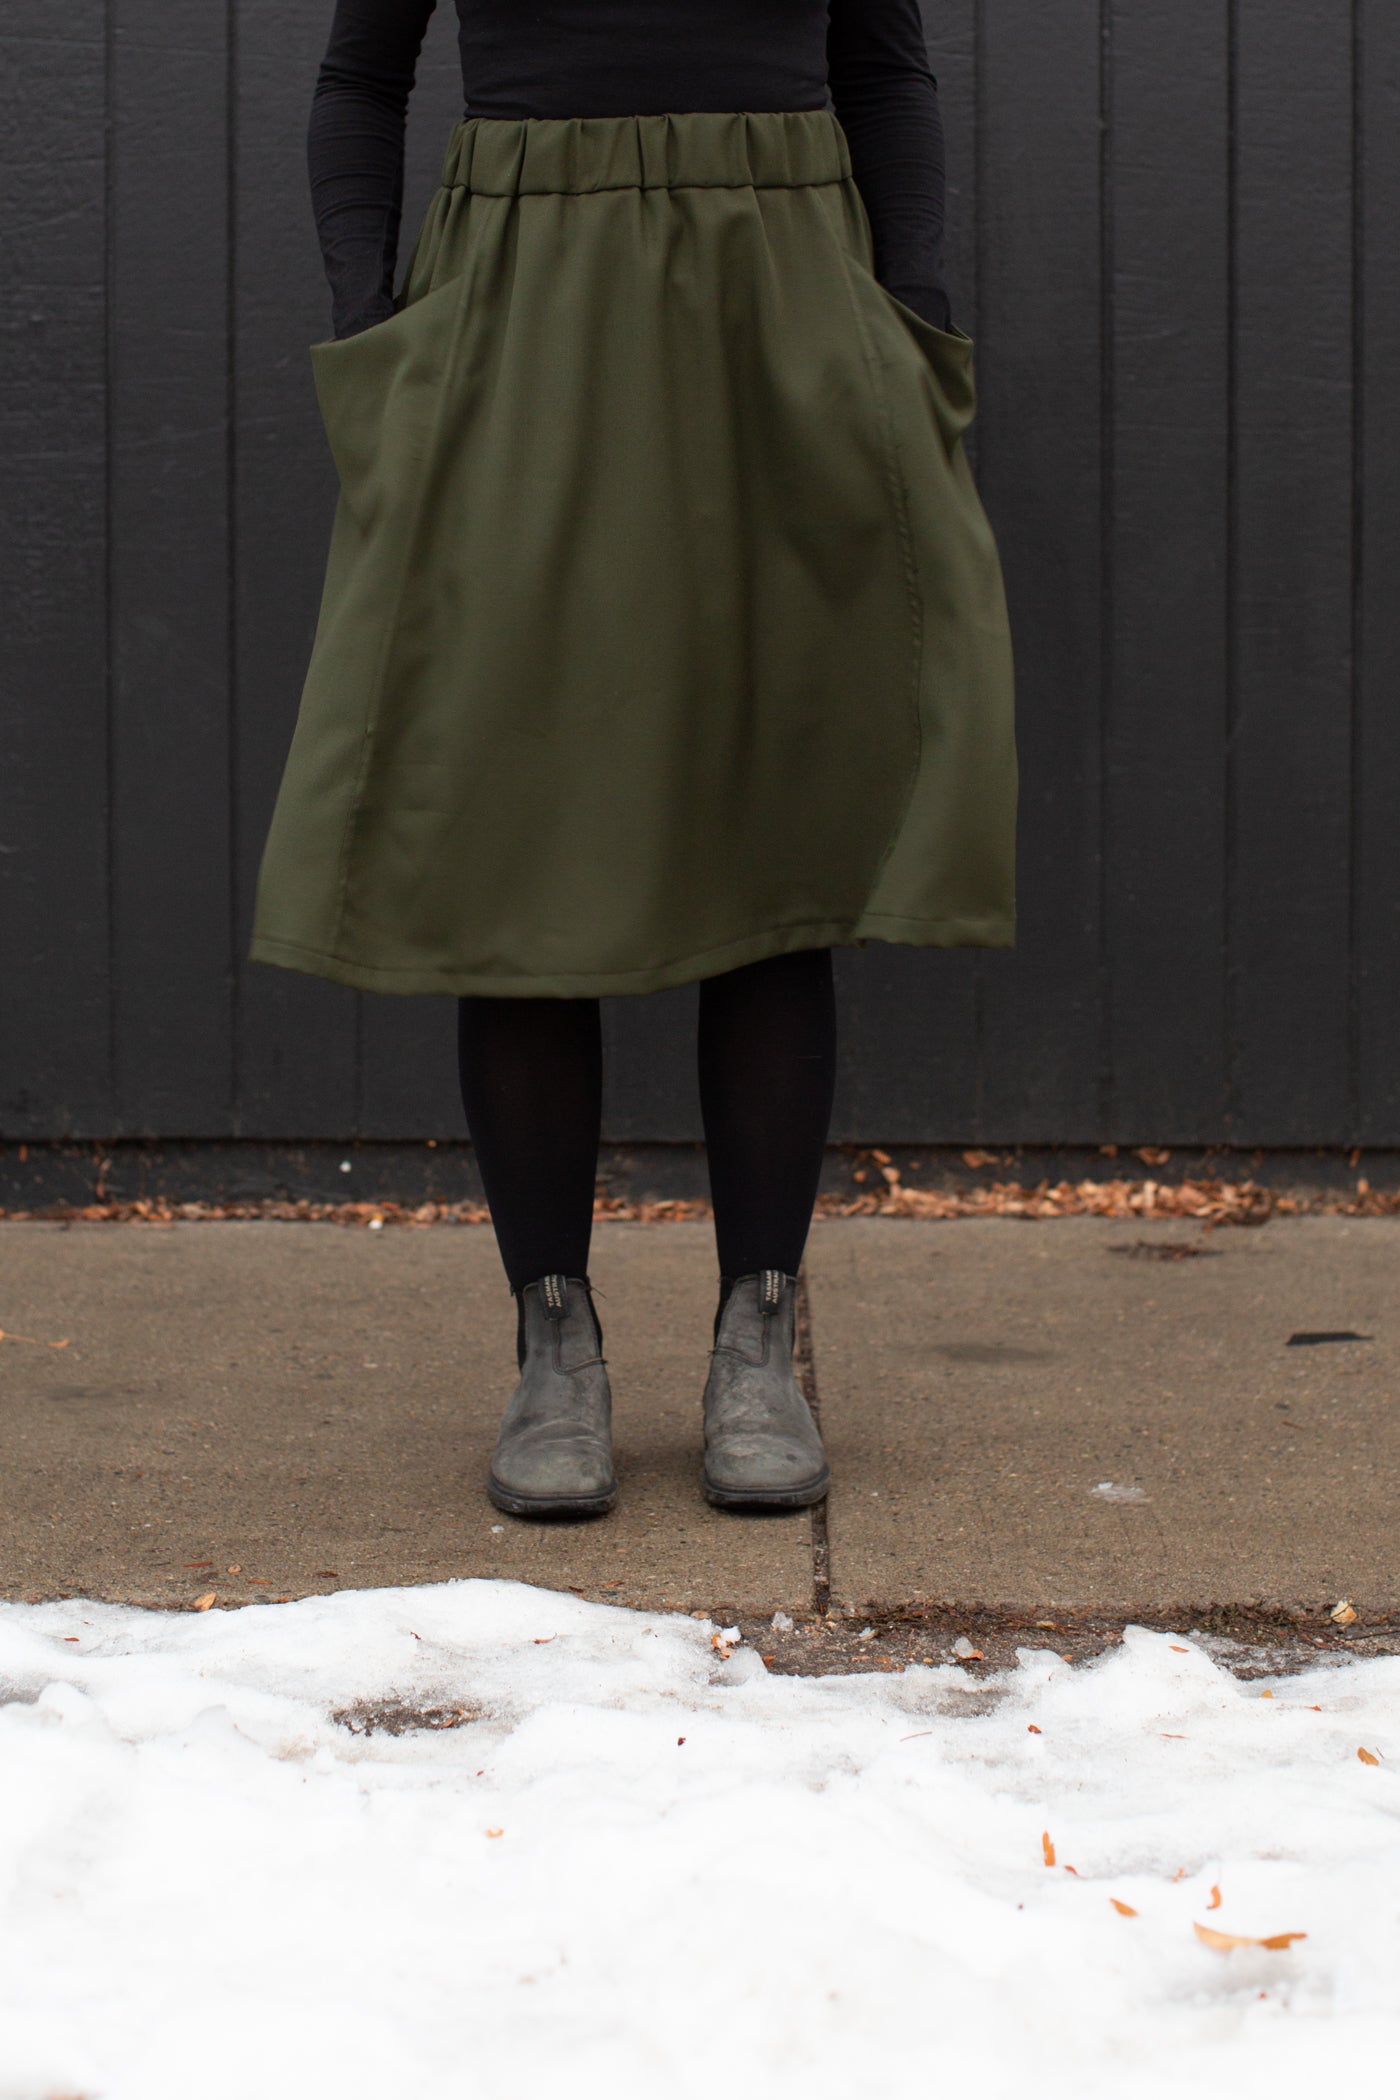 Mid waist to feet image of Jaime standing against a black wall, wearing an olive green skirt, black leggings and shoes with her hands in the pockets.  Jaime is standing on a sidewalk with snow in the foreground.